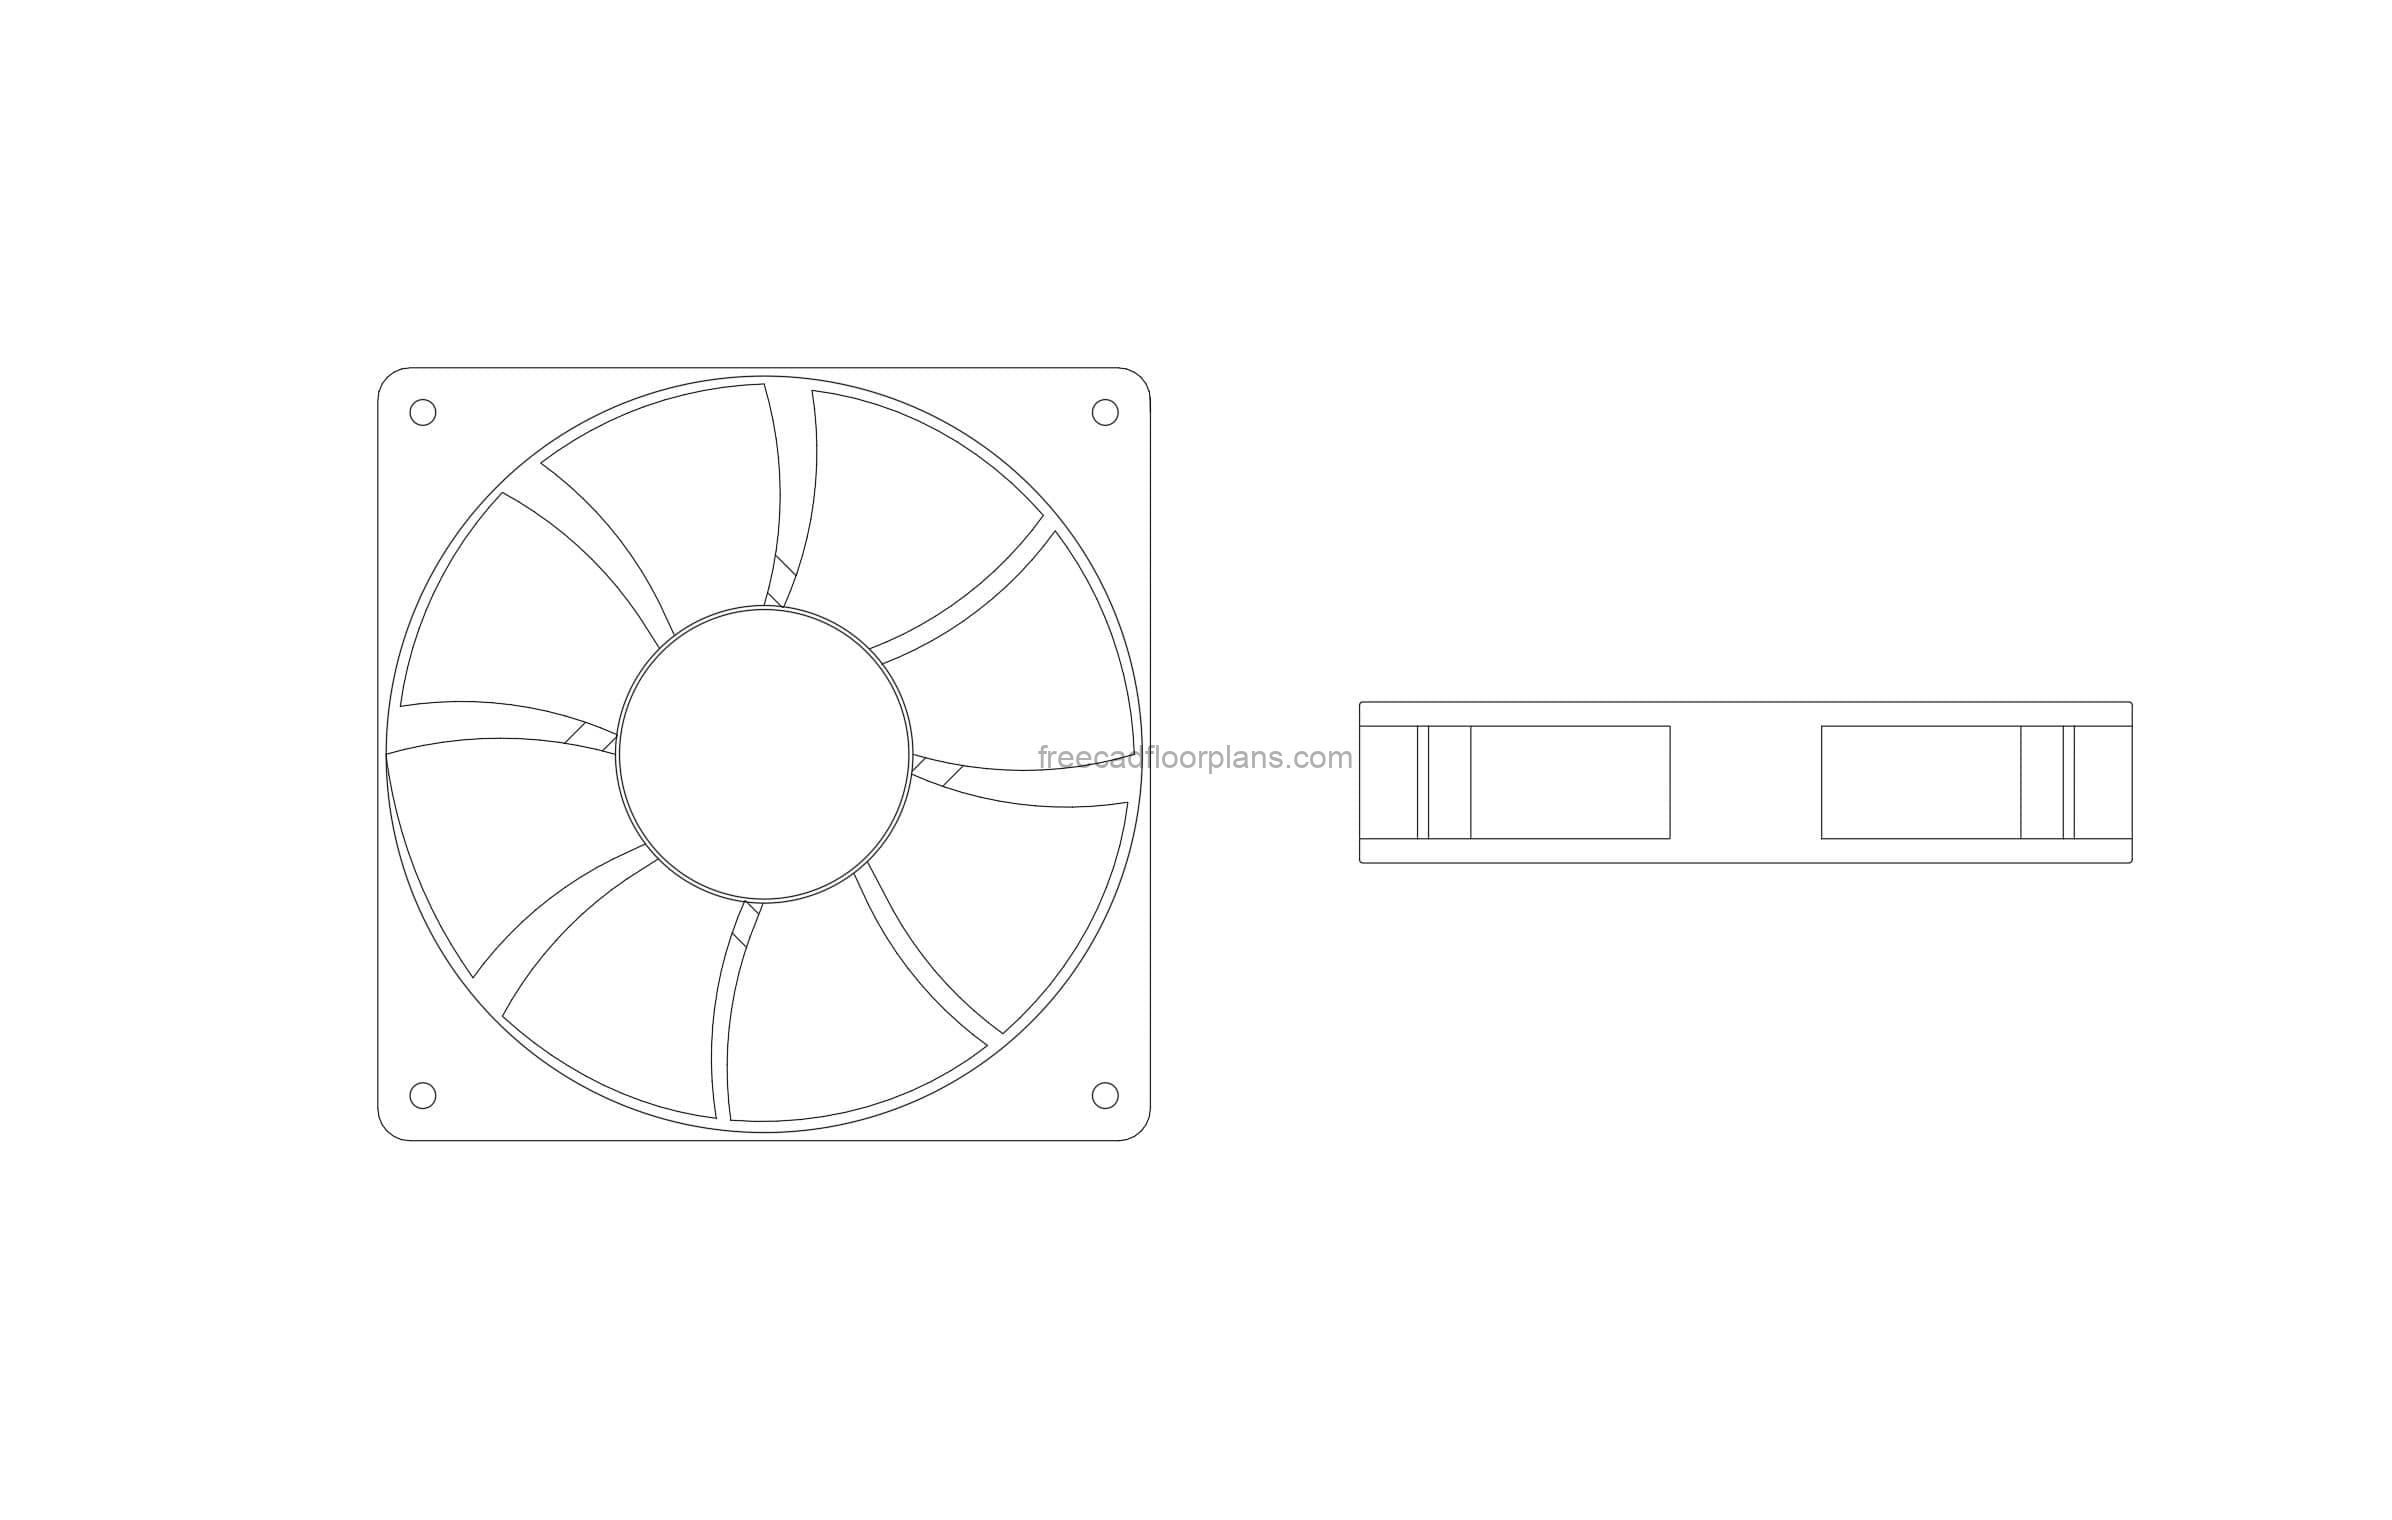 120 mm fan dwg drawing for free download autocad file all 2D views